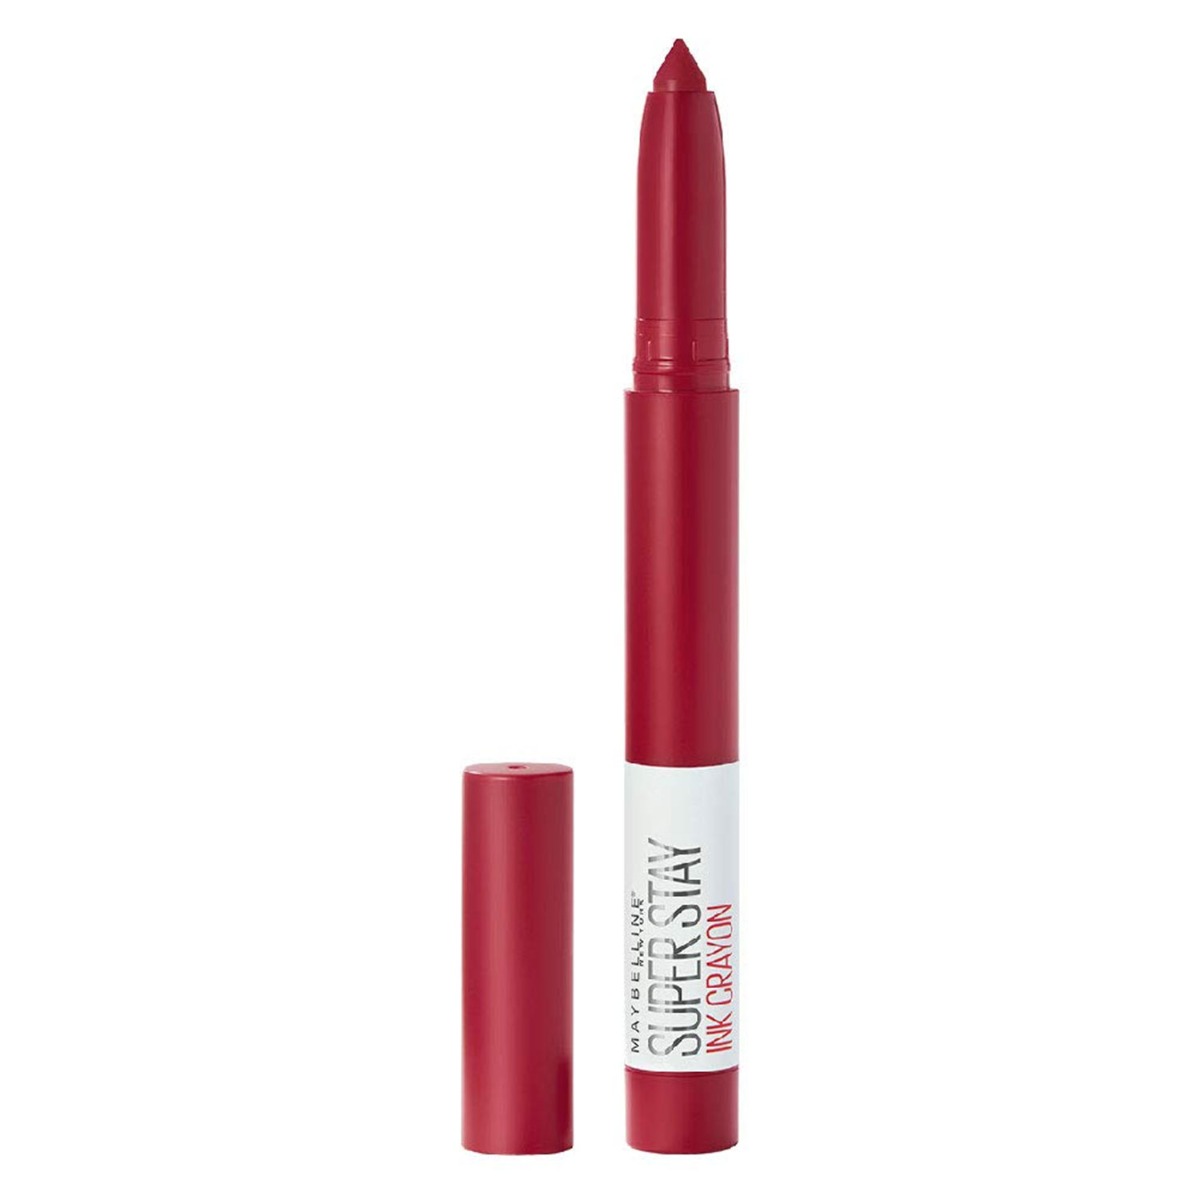 Maybelline New York Super Stay Ink Crayon Lipstick, Matte Finish - 50 Own Your Empire, 1.2gm